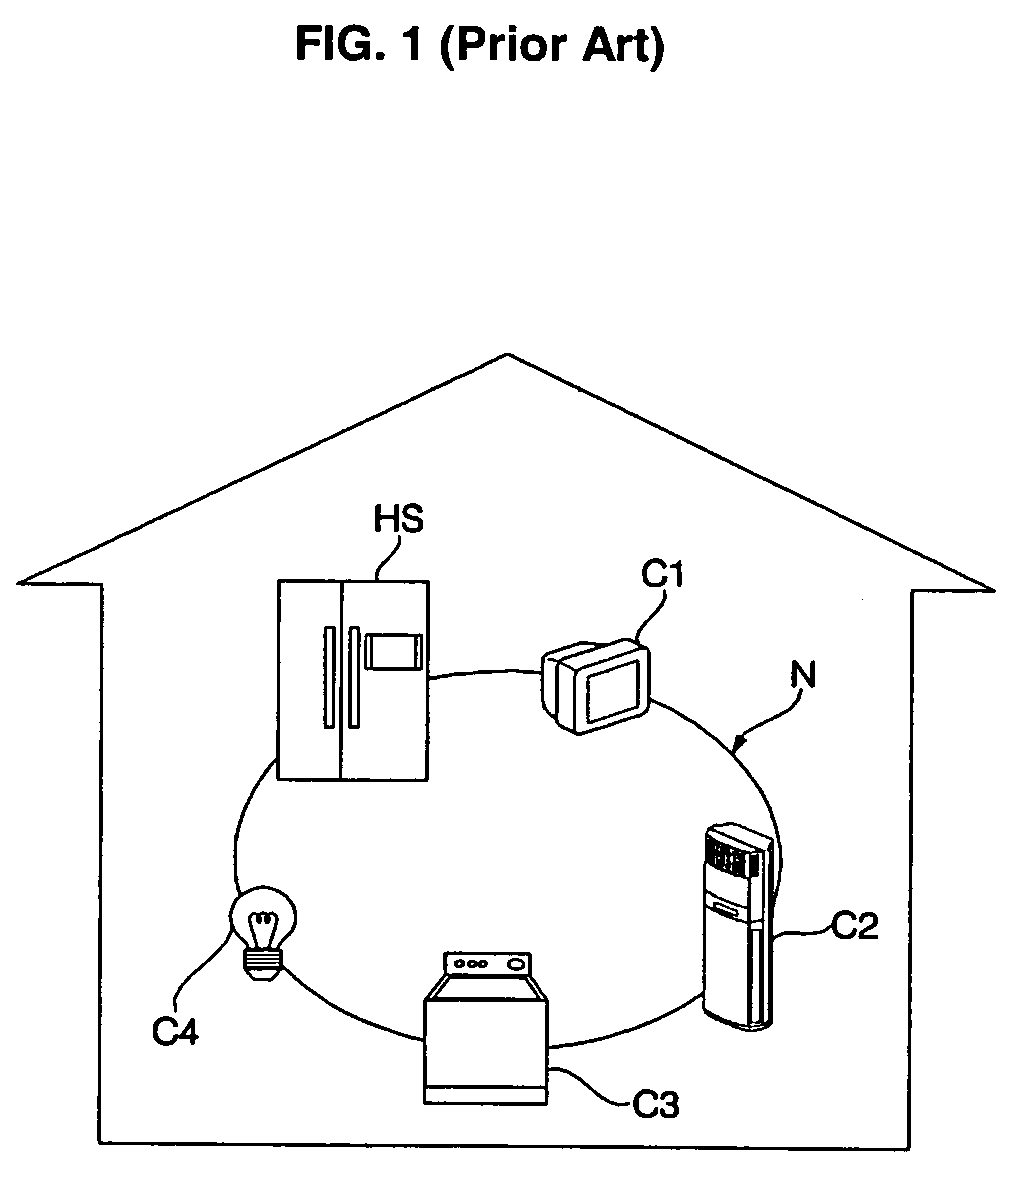 Home networking system having alive and connection termination messages and method for operating same